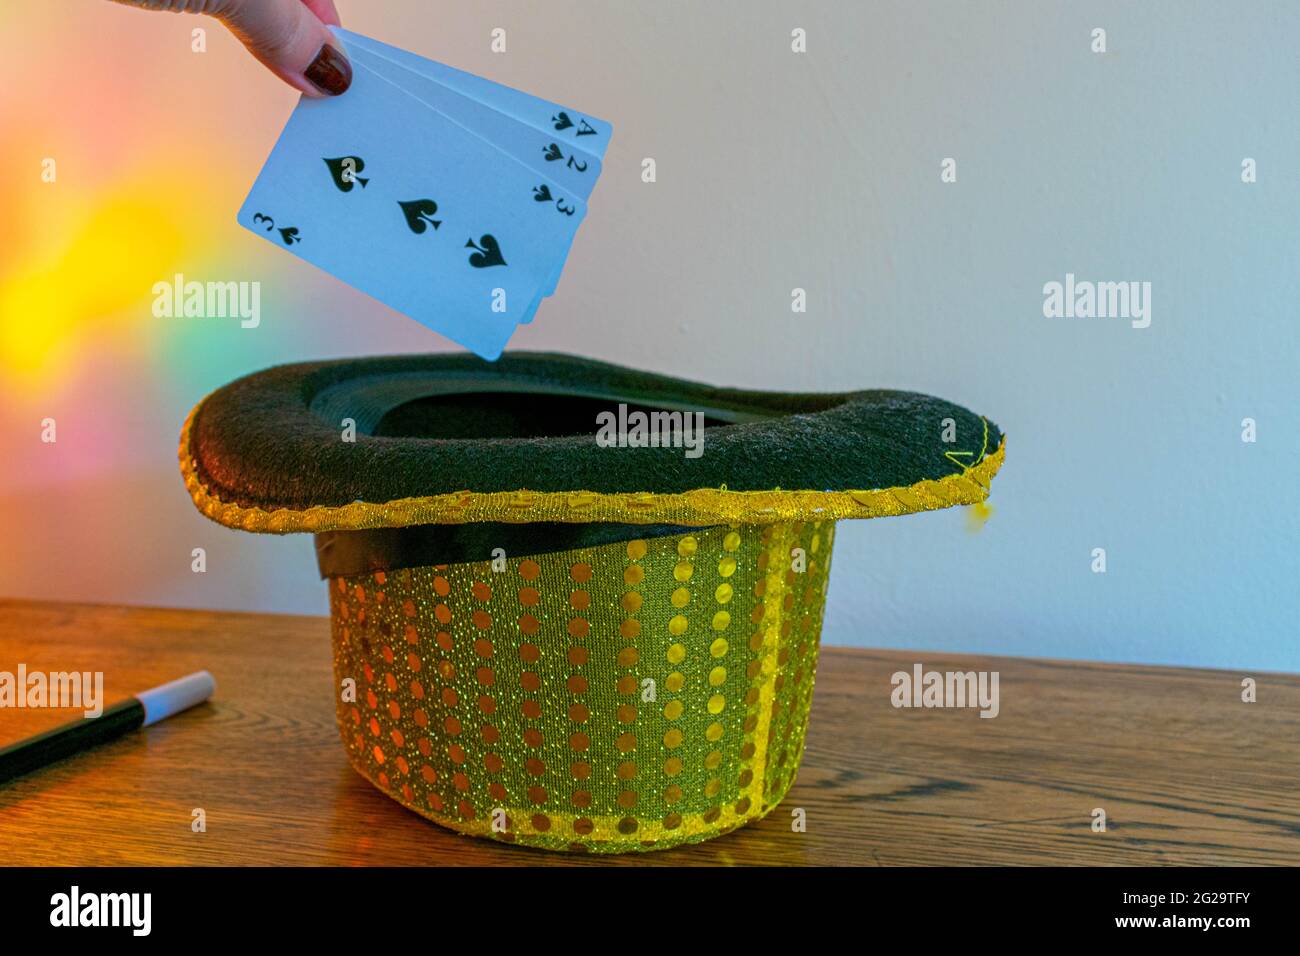 Magic show magicians trick concept background. Children's magic box with sequined top hats, magic wand, playing cards, cup and ball trick, secret draw Stock Photo